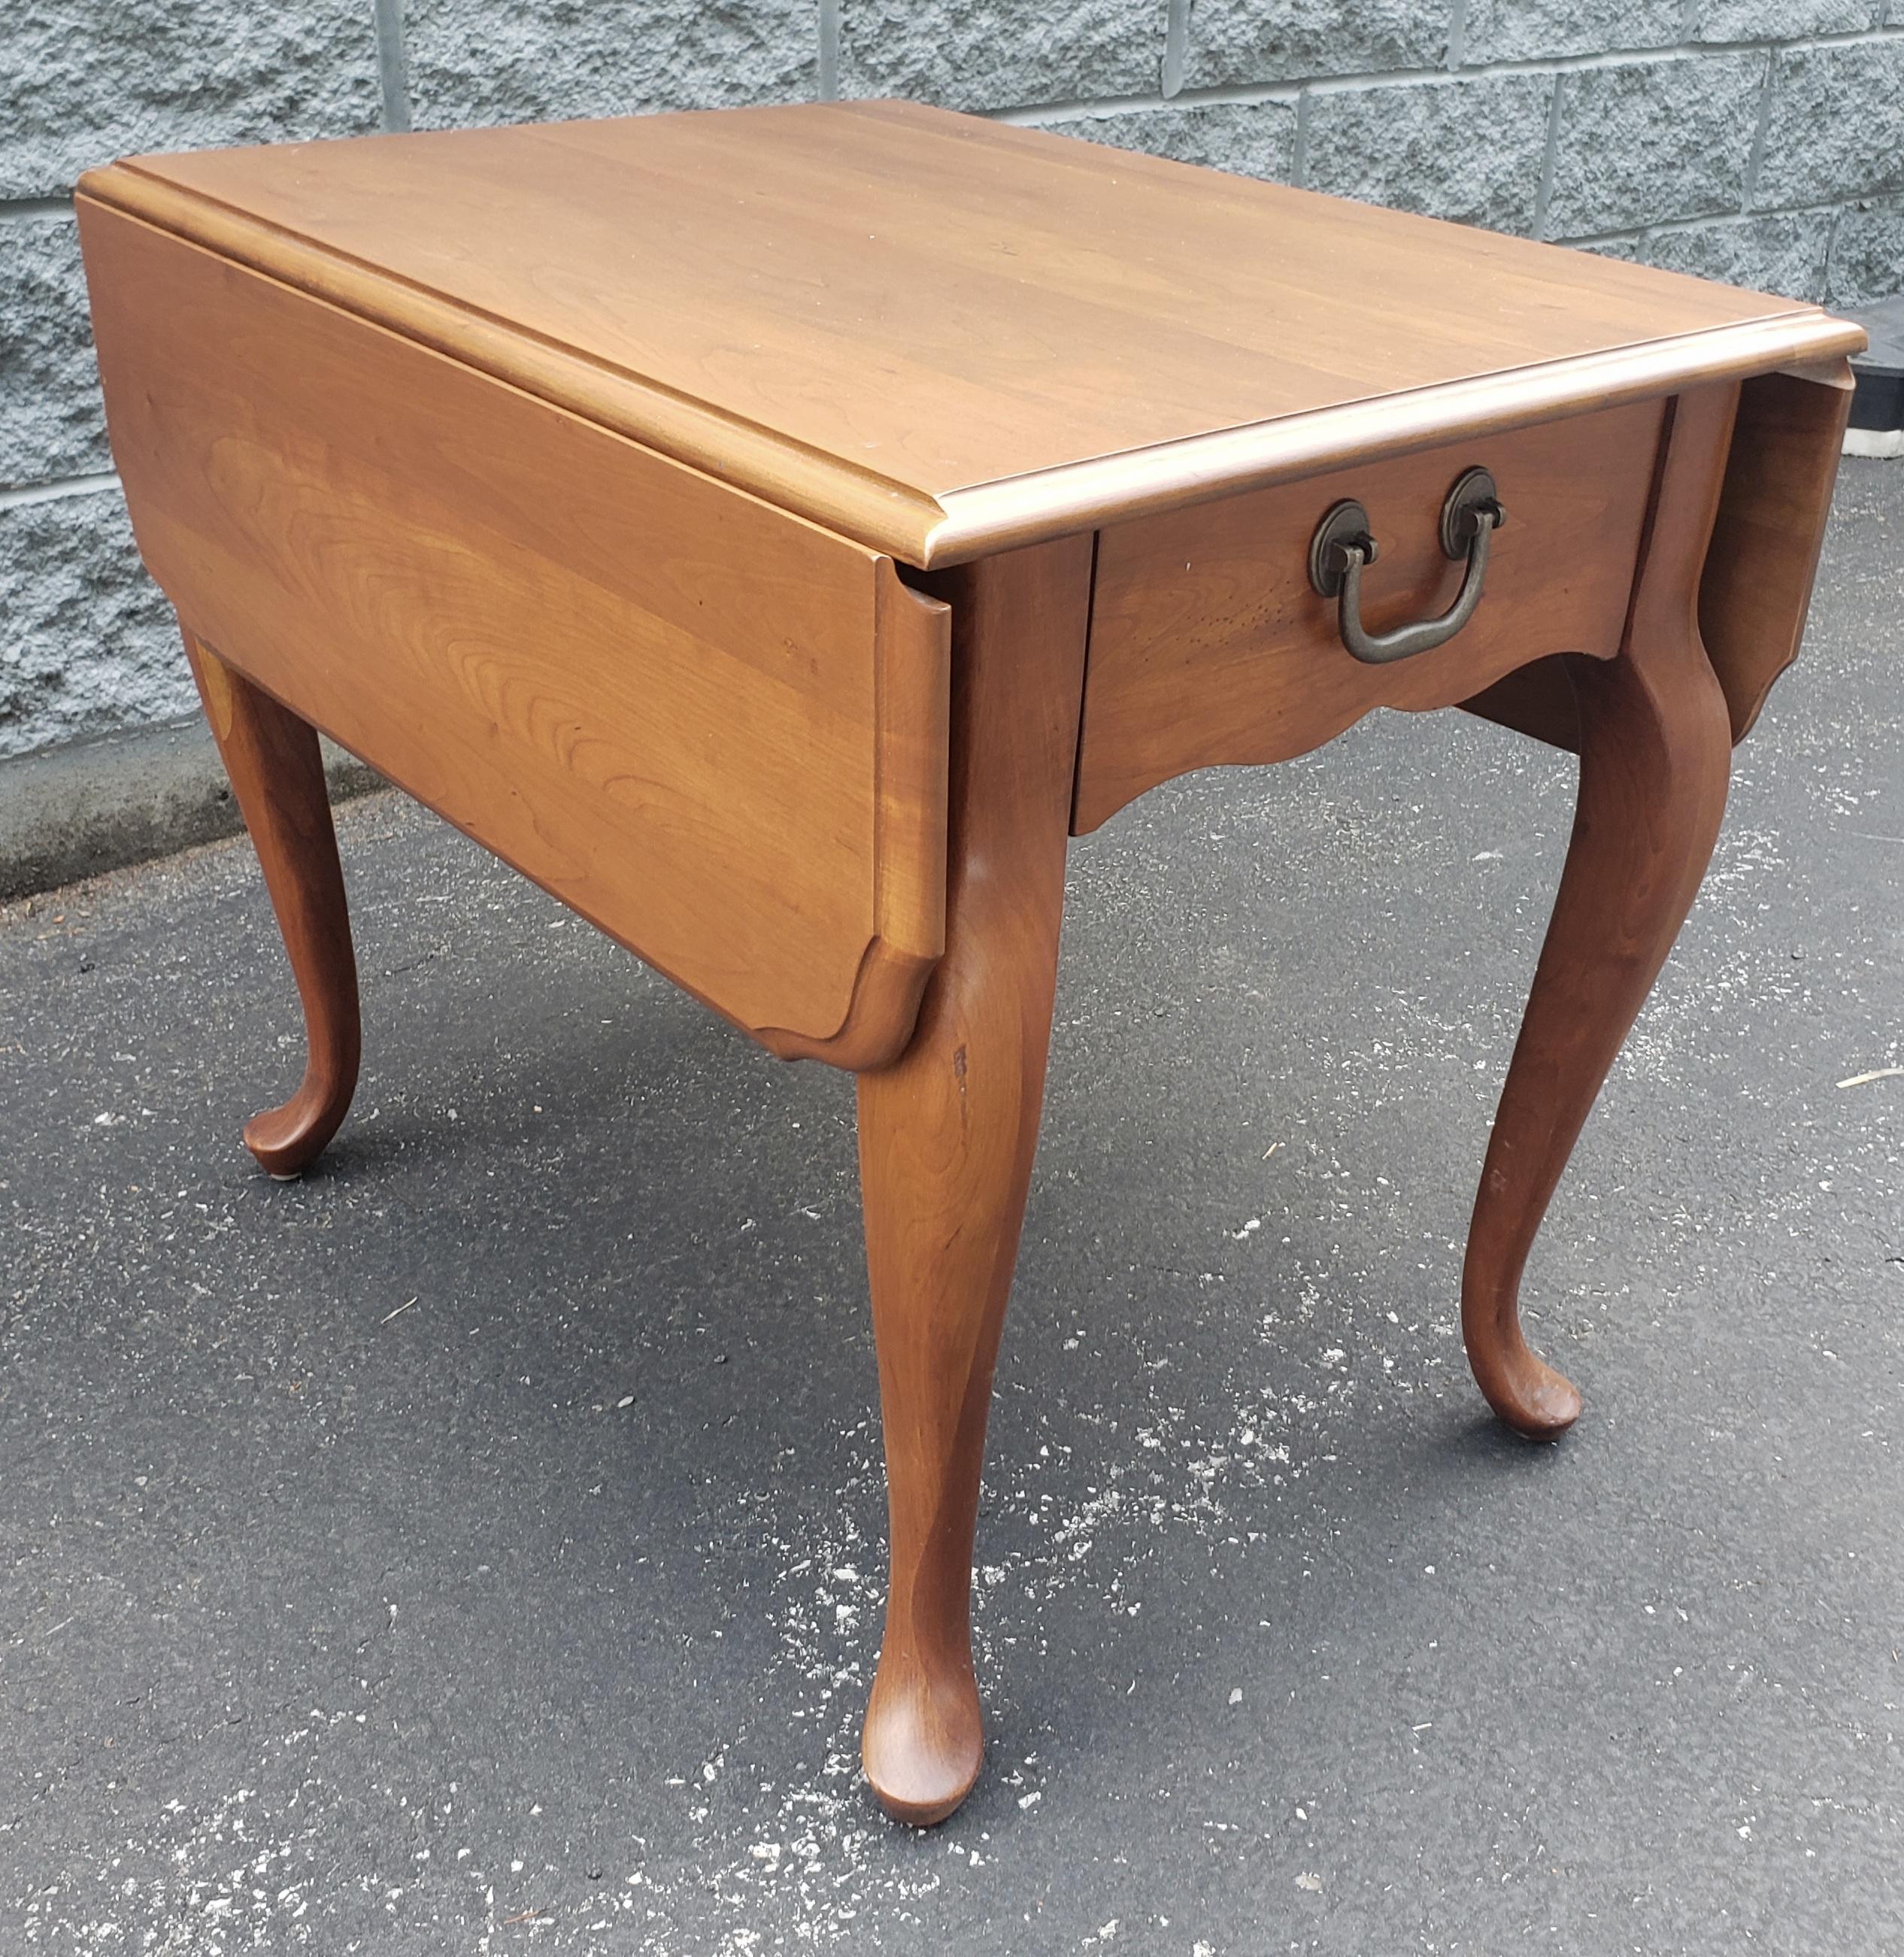 A late 20th century Pennsylvania House Cherry Drop-Leaf Penbroke Side Table in great vintage condition. Measures 21.5